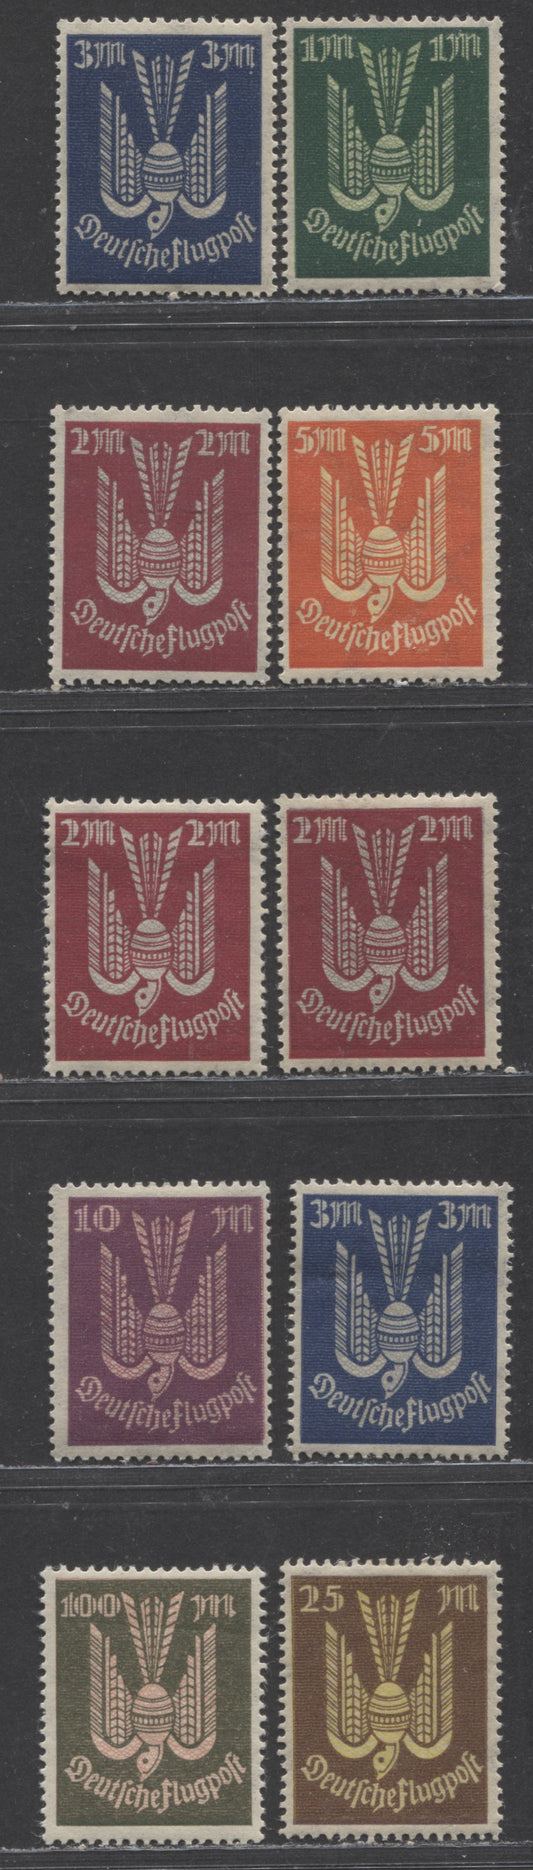 Lot 98 Germany SC#C8-C14 var(MI#215-218,235-237 var) 1922-1923 High Valule Airmail Issue, With Burelage Printed On Top Of Background Colour, 10 F/VF OG & NH Singles, Click on Listing to See ALL Pictures, Estimated Value $10 USD